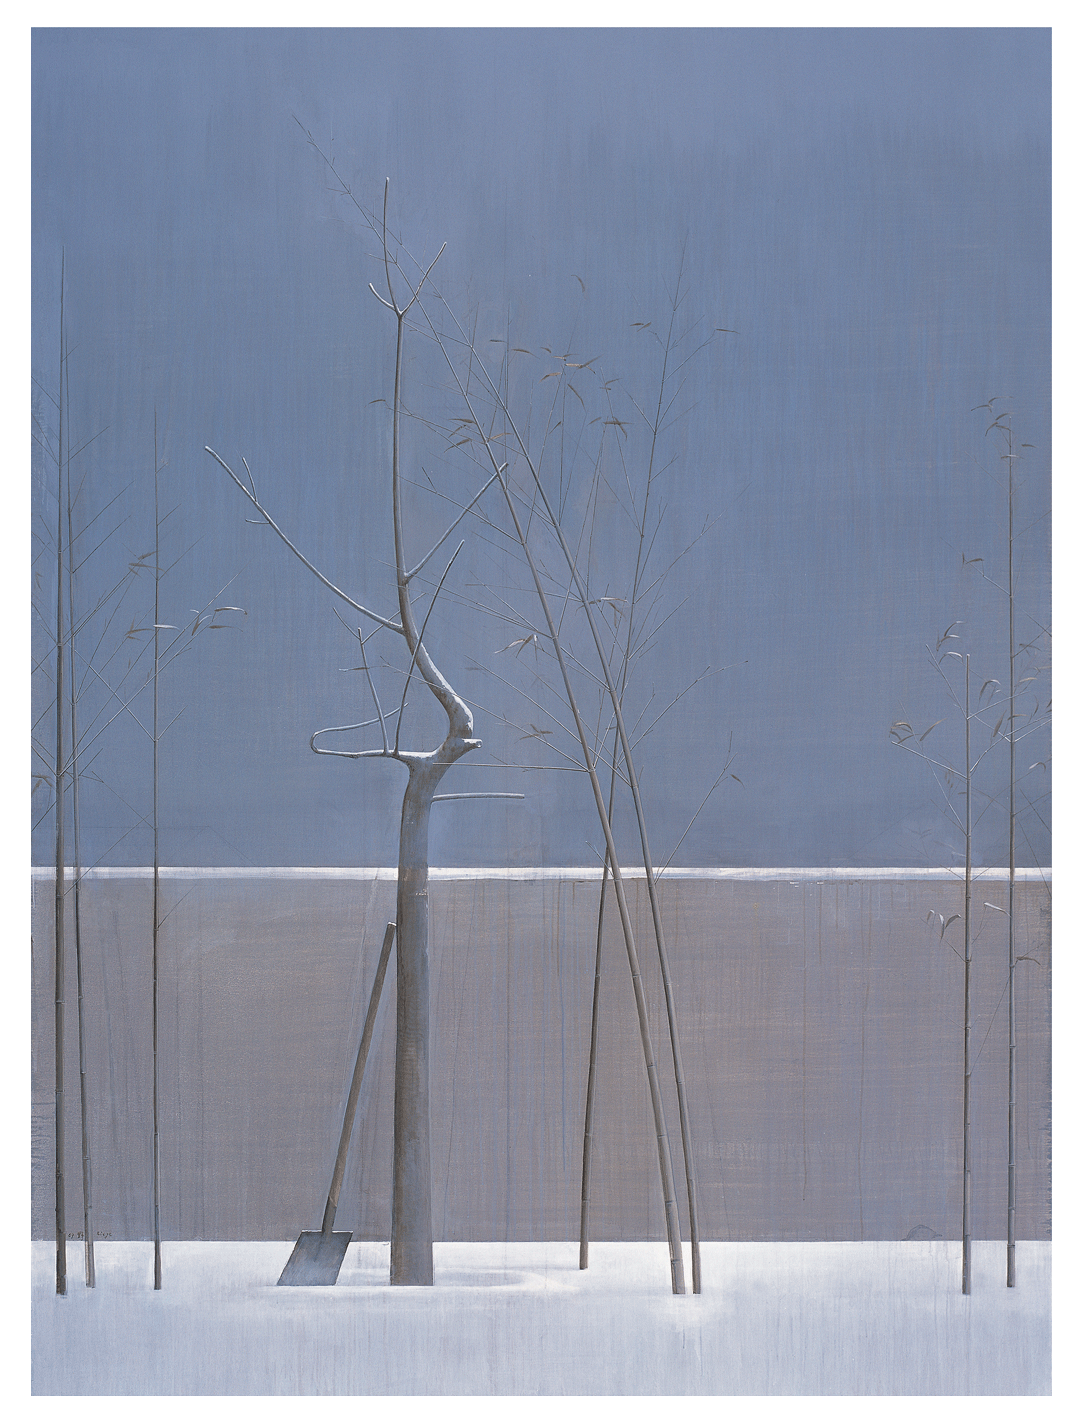 A painting by Liu Ye, titled Composition with Bamboo and Tree, dated 2007.